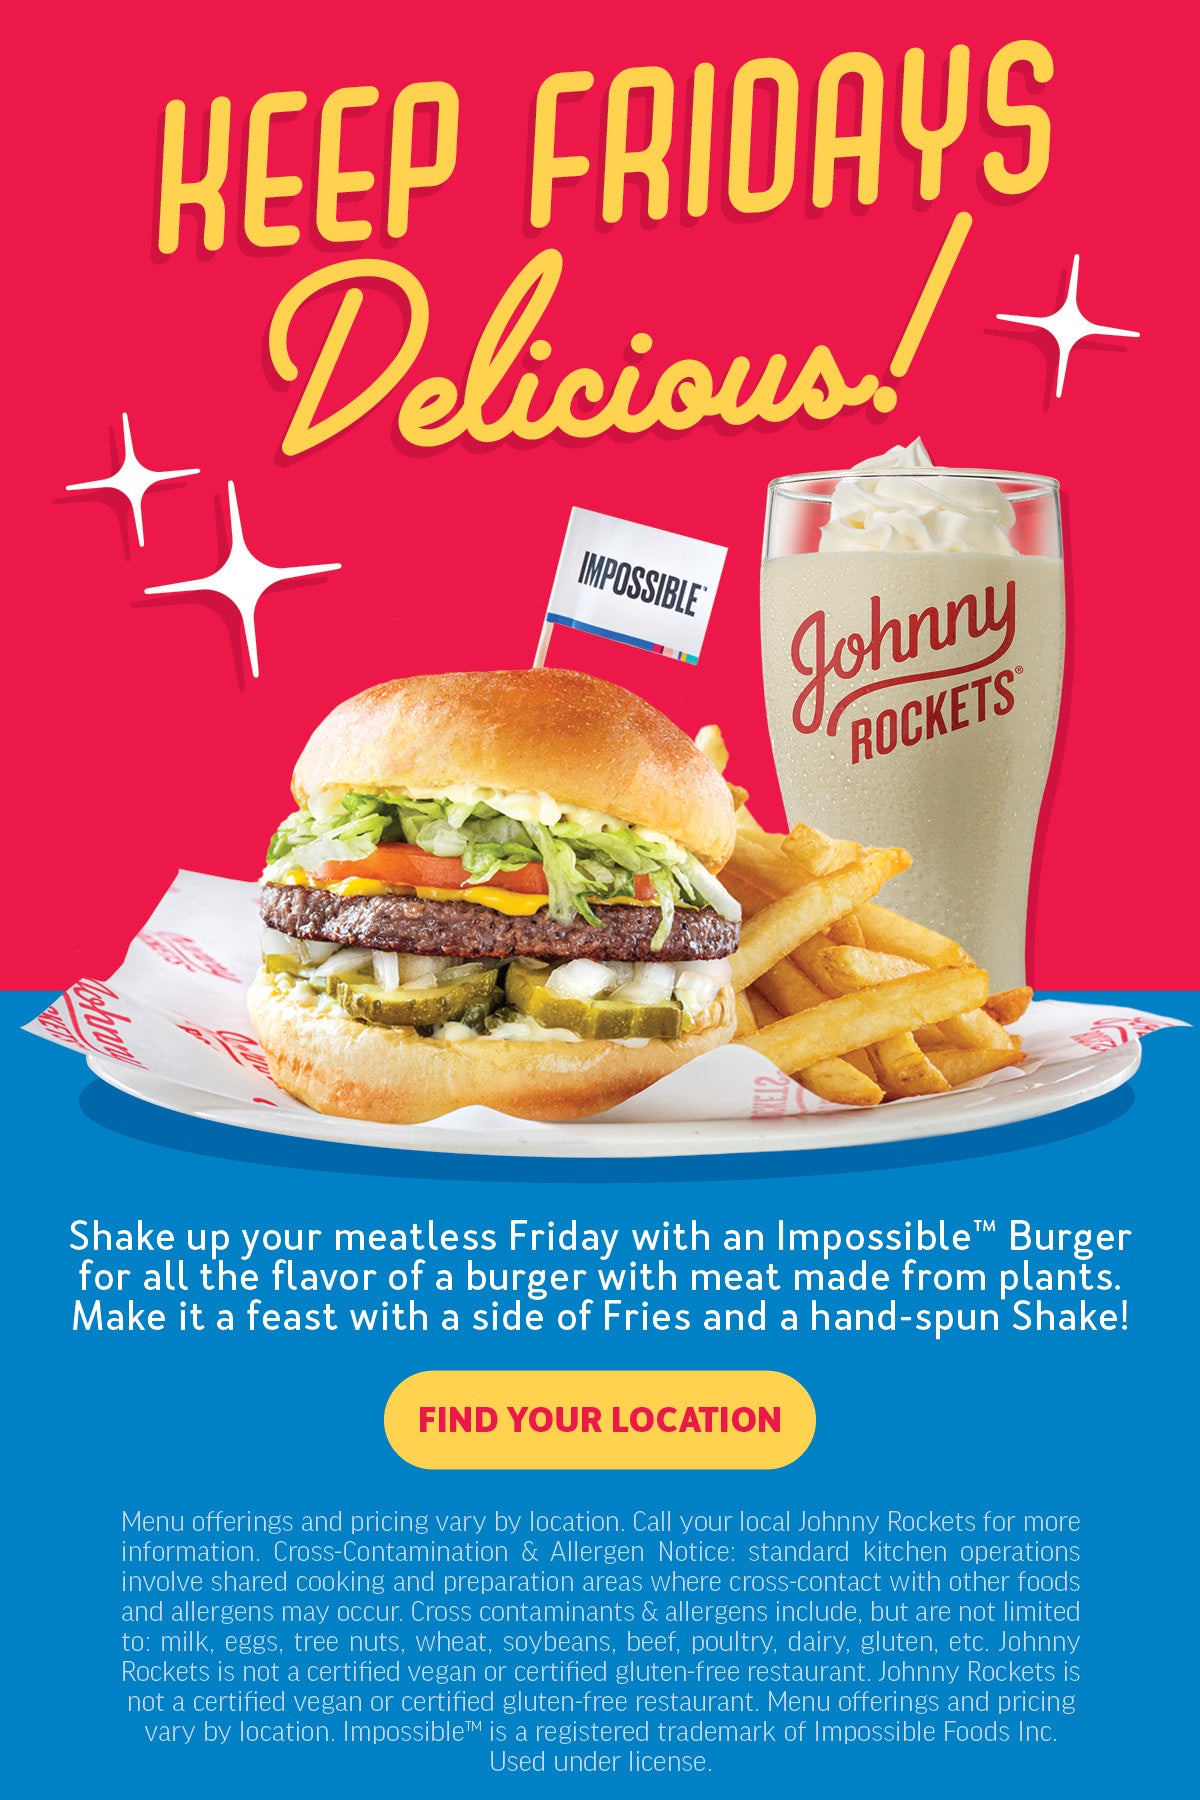 Enjoy Meatless Fridays With Our Impossible™ Burger!